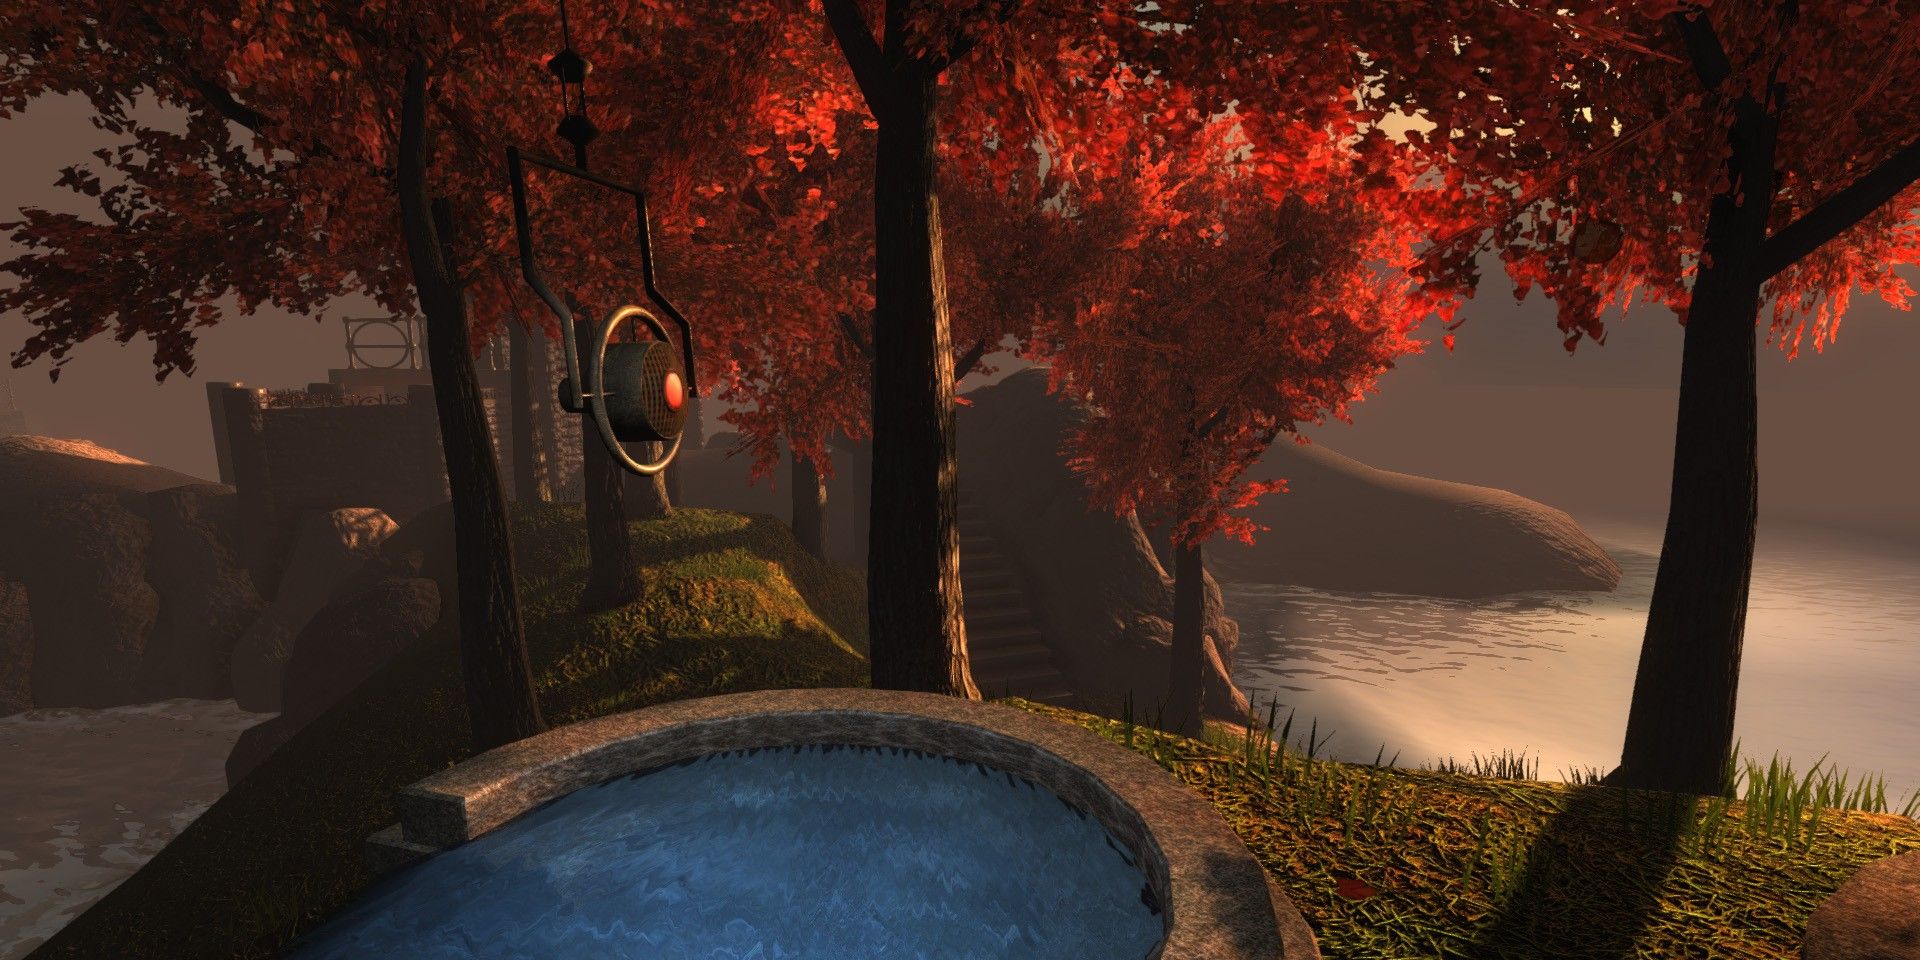 Myst pool with trees